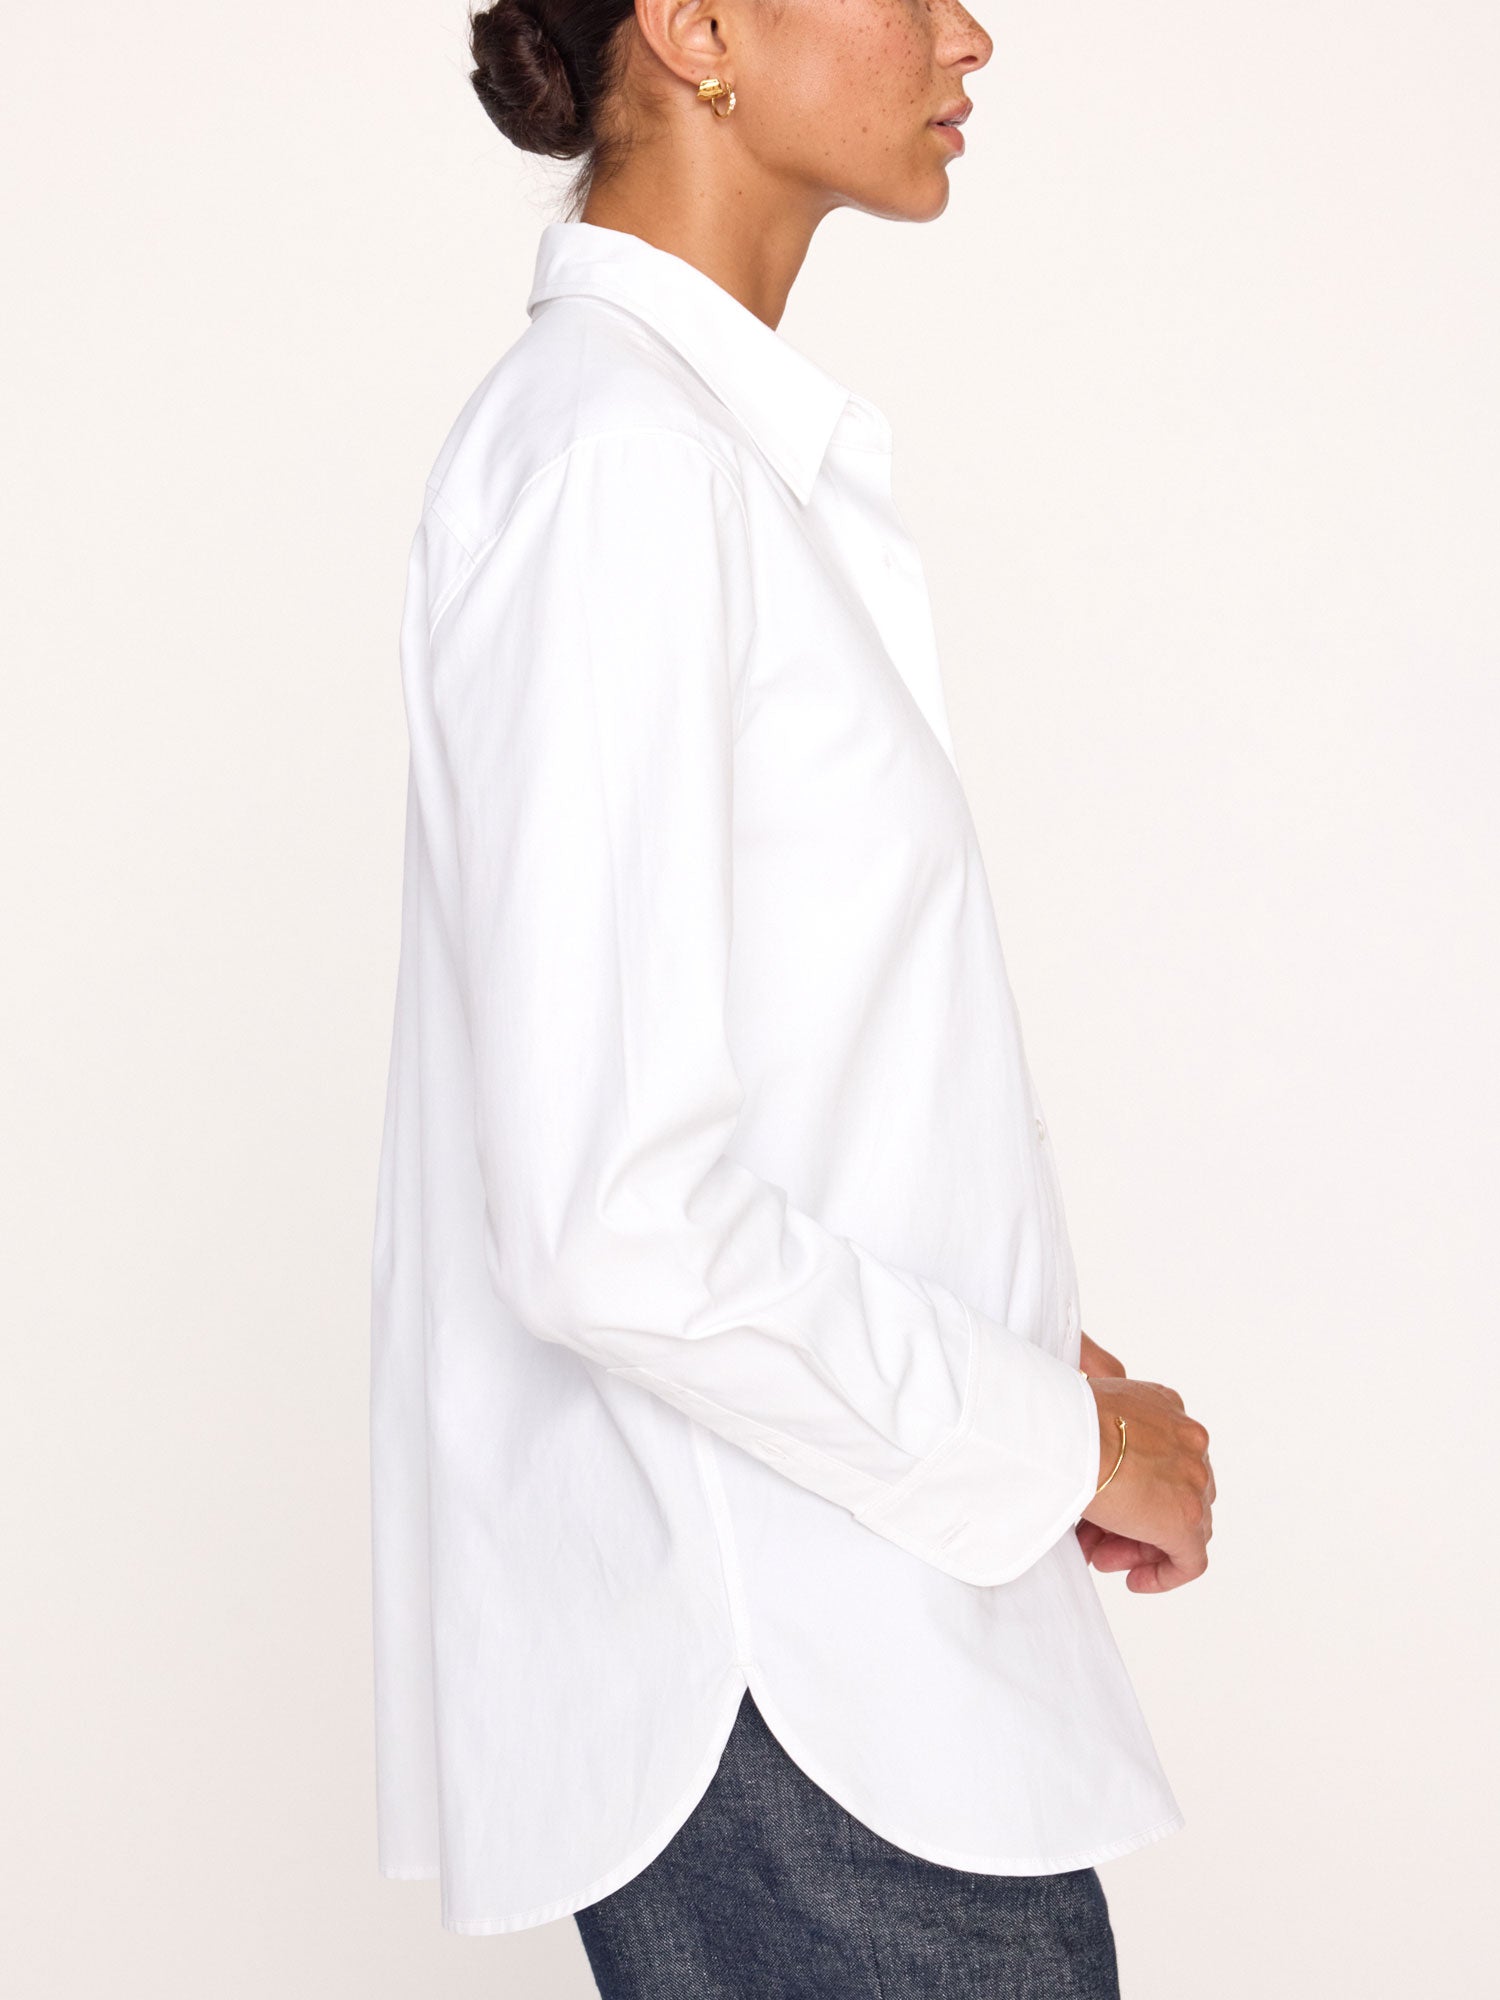 Lark button up shirt white side view